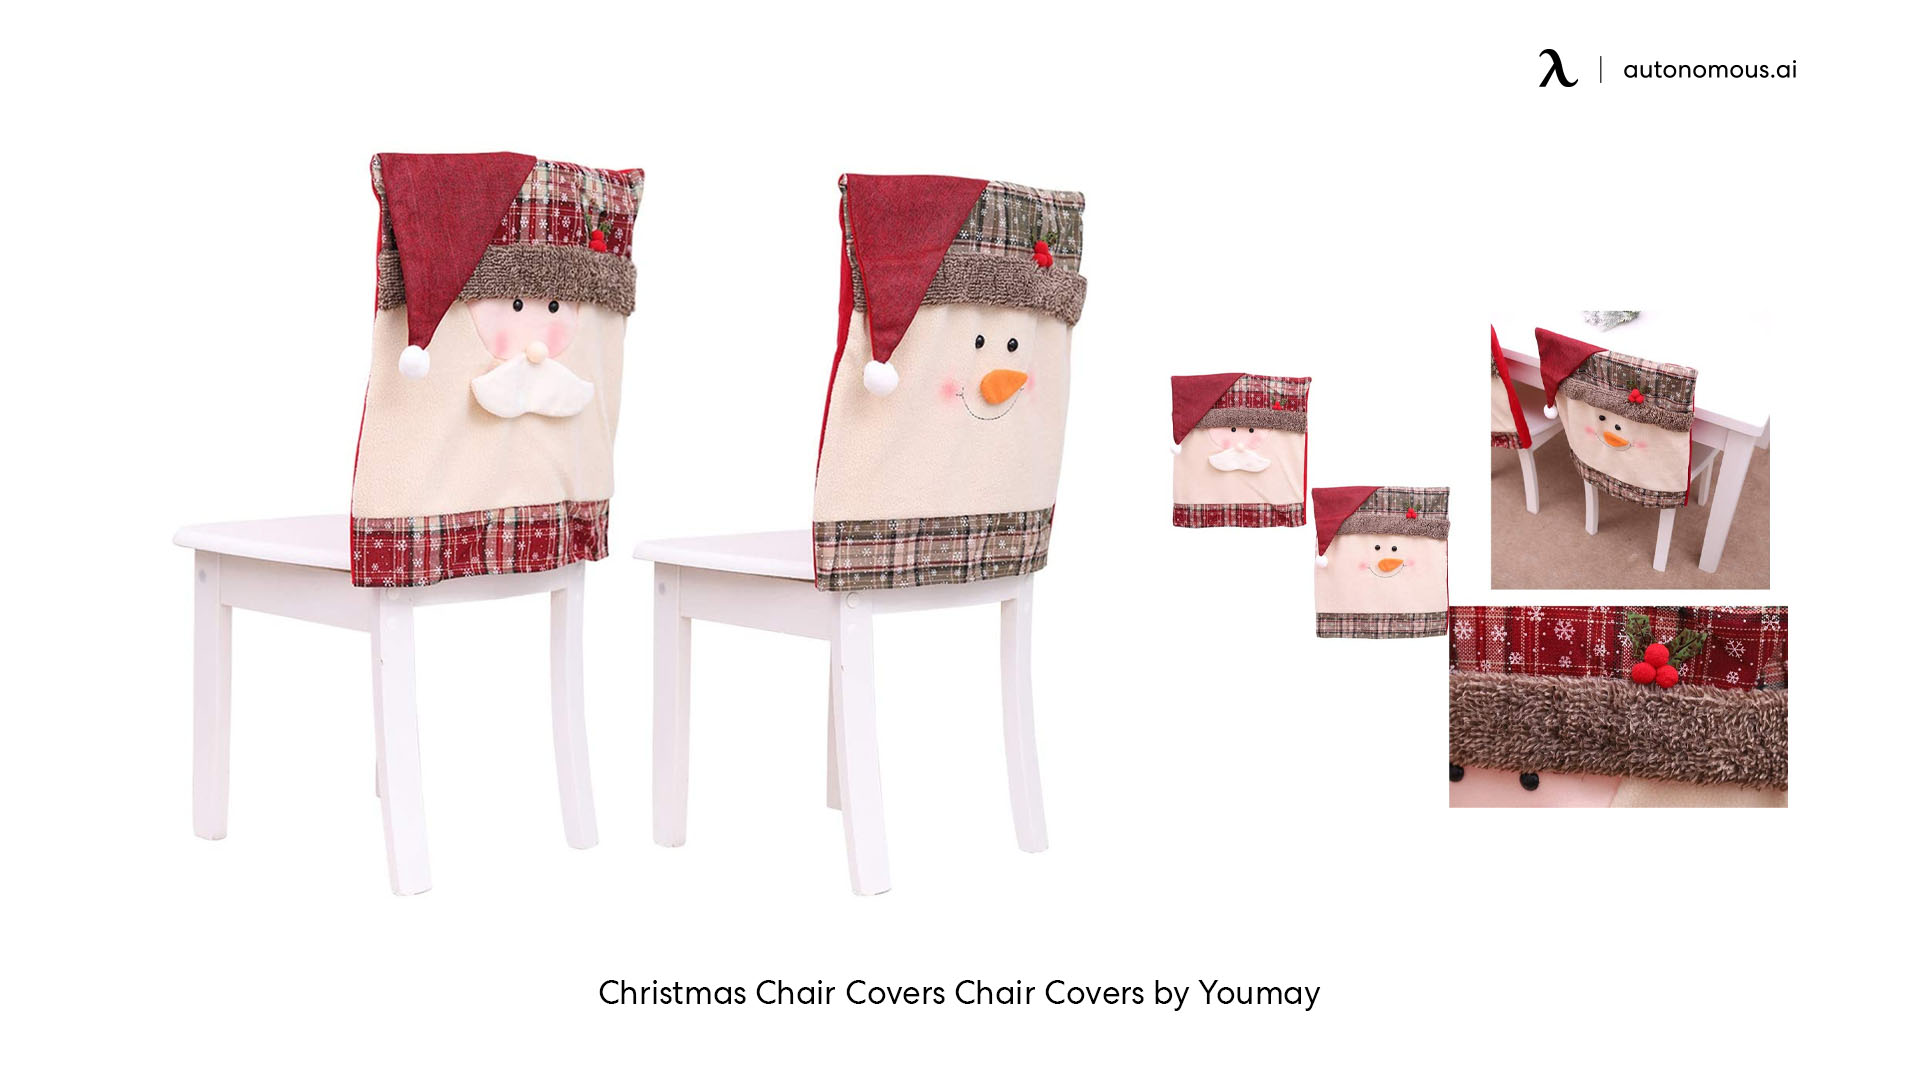 Snowman cover chair Christmas décor for chairs